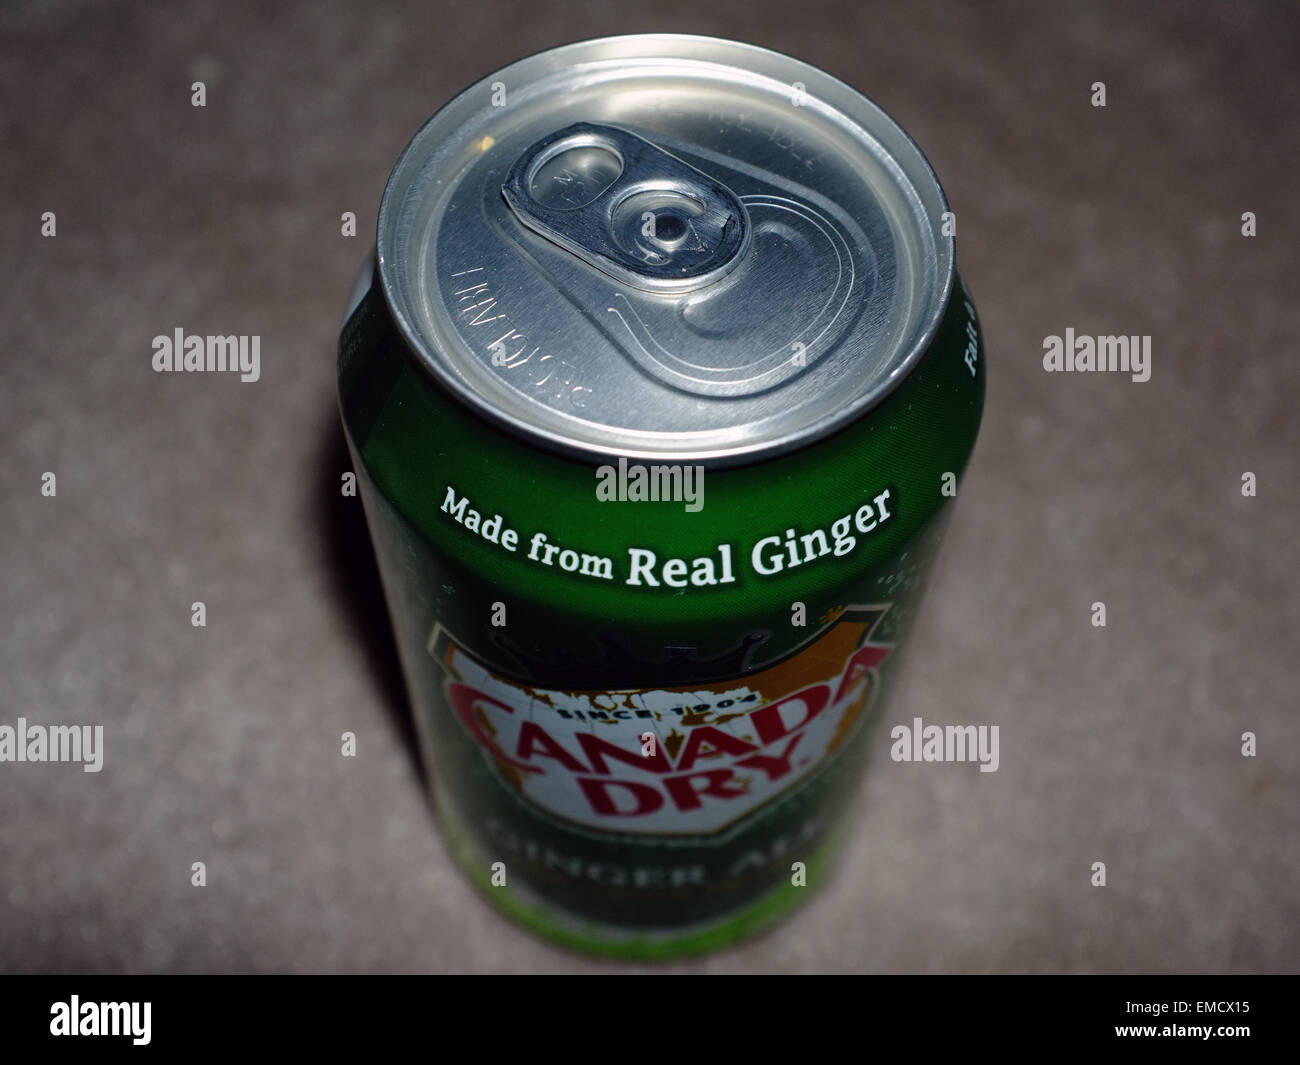 Canada Dry Ginger Ale And Lemonade Expiration Date A Can Of Canada Dry Ginger Ale Photographed From Above Against A Stock Photo Alamy